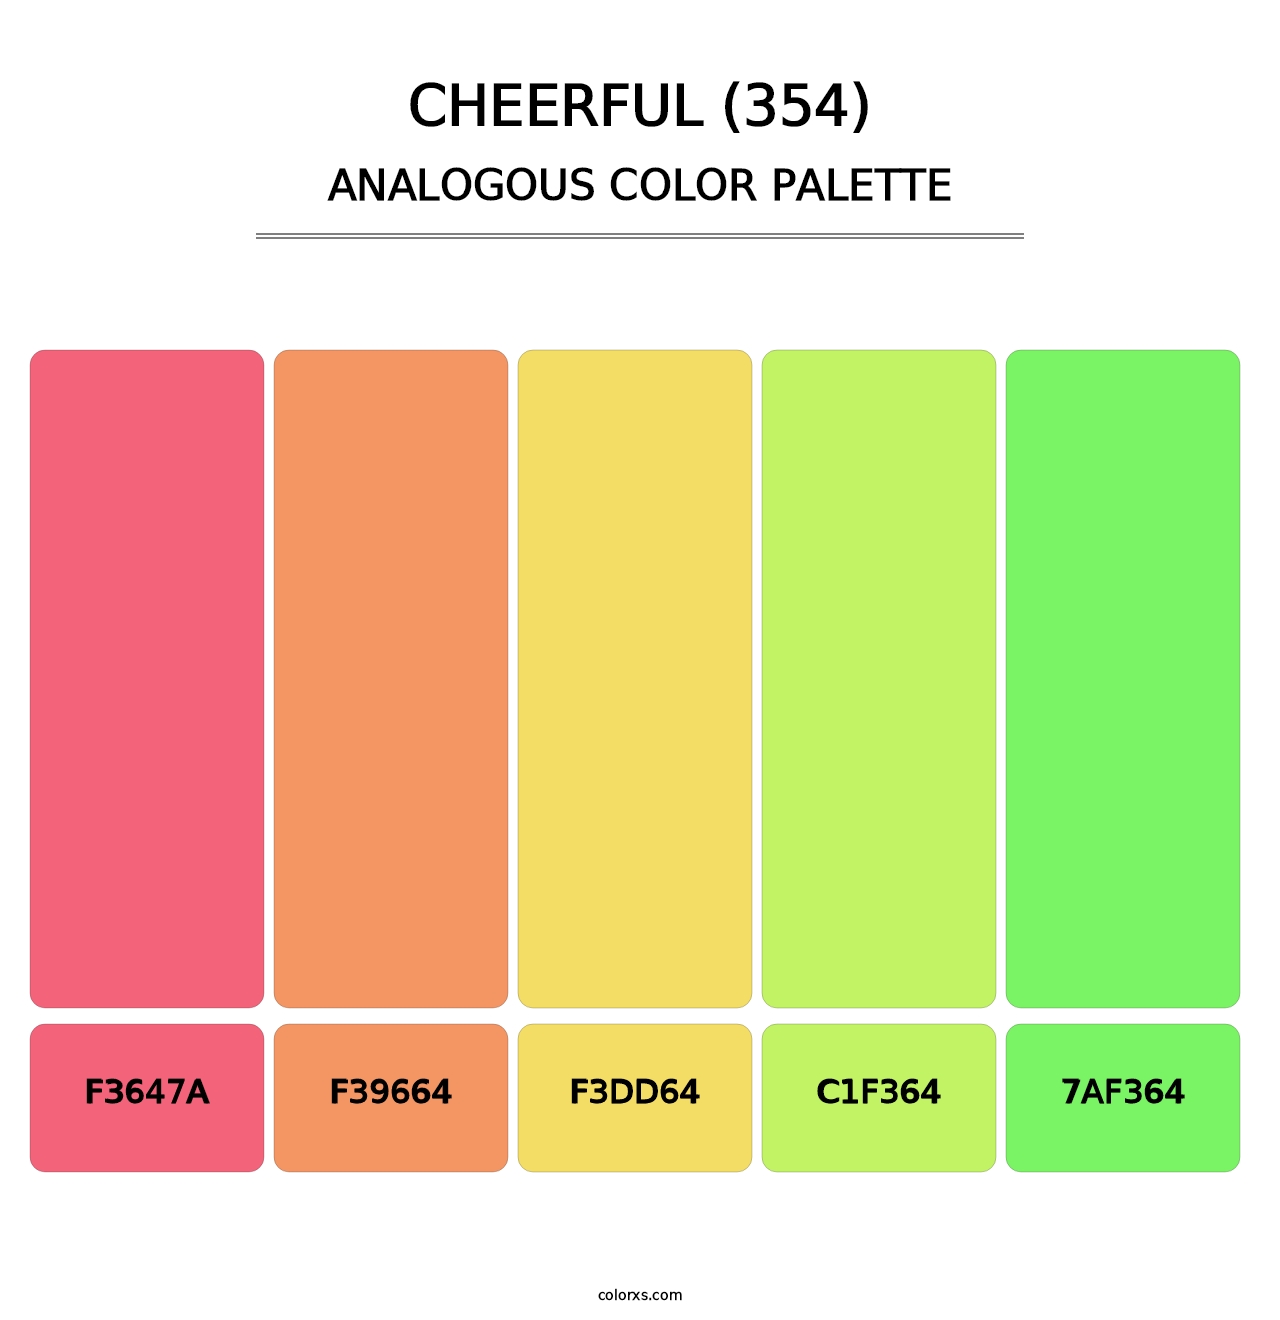 Cheerful (354) - Analogous Color Palette